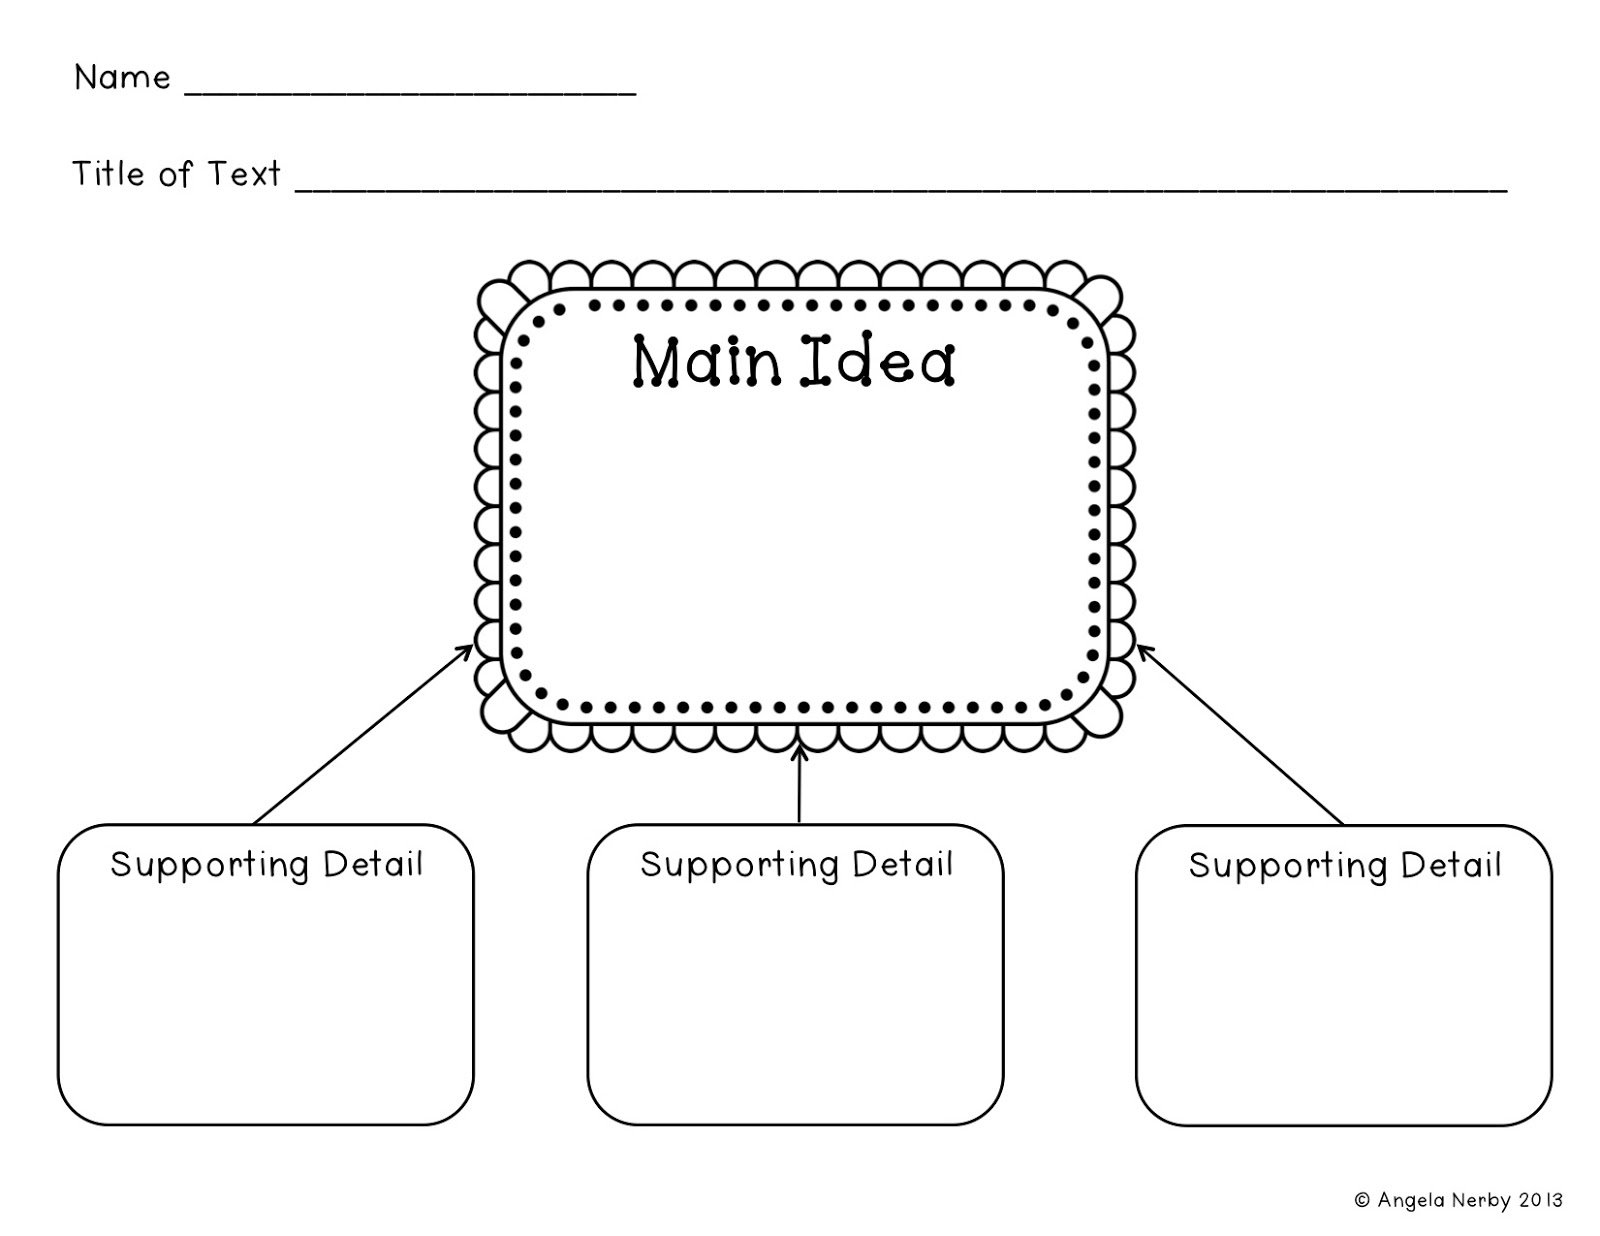 10 Most Popular Main Idea And Supporting Details Graphic Organizer main idea and supporting details graphic organizer worksheets for 5 2022